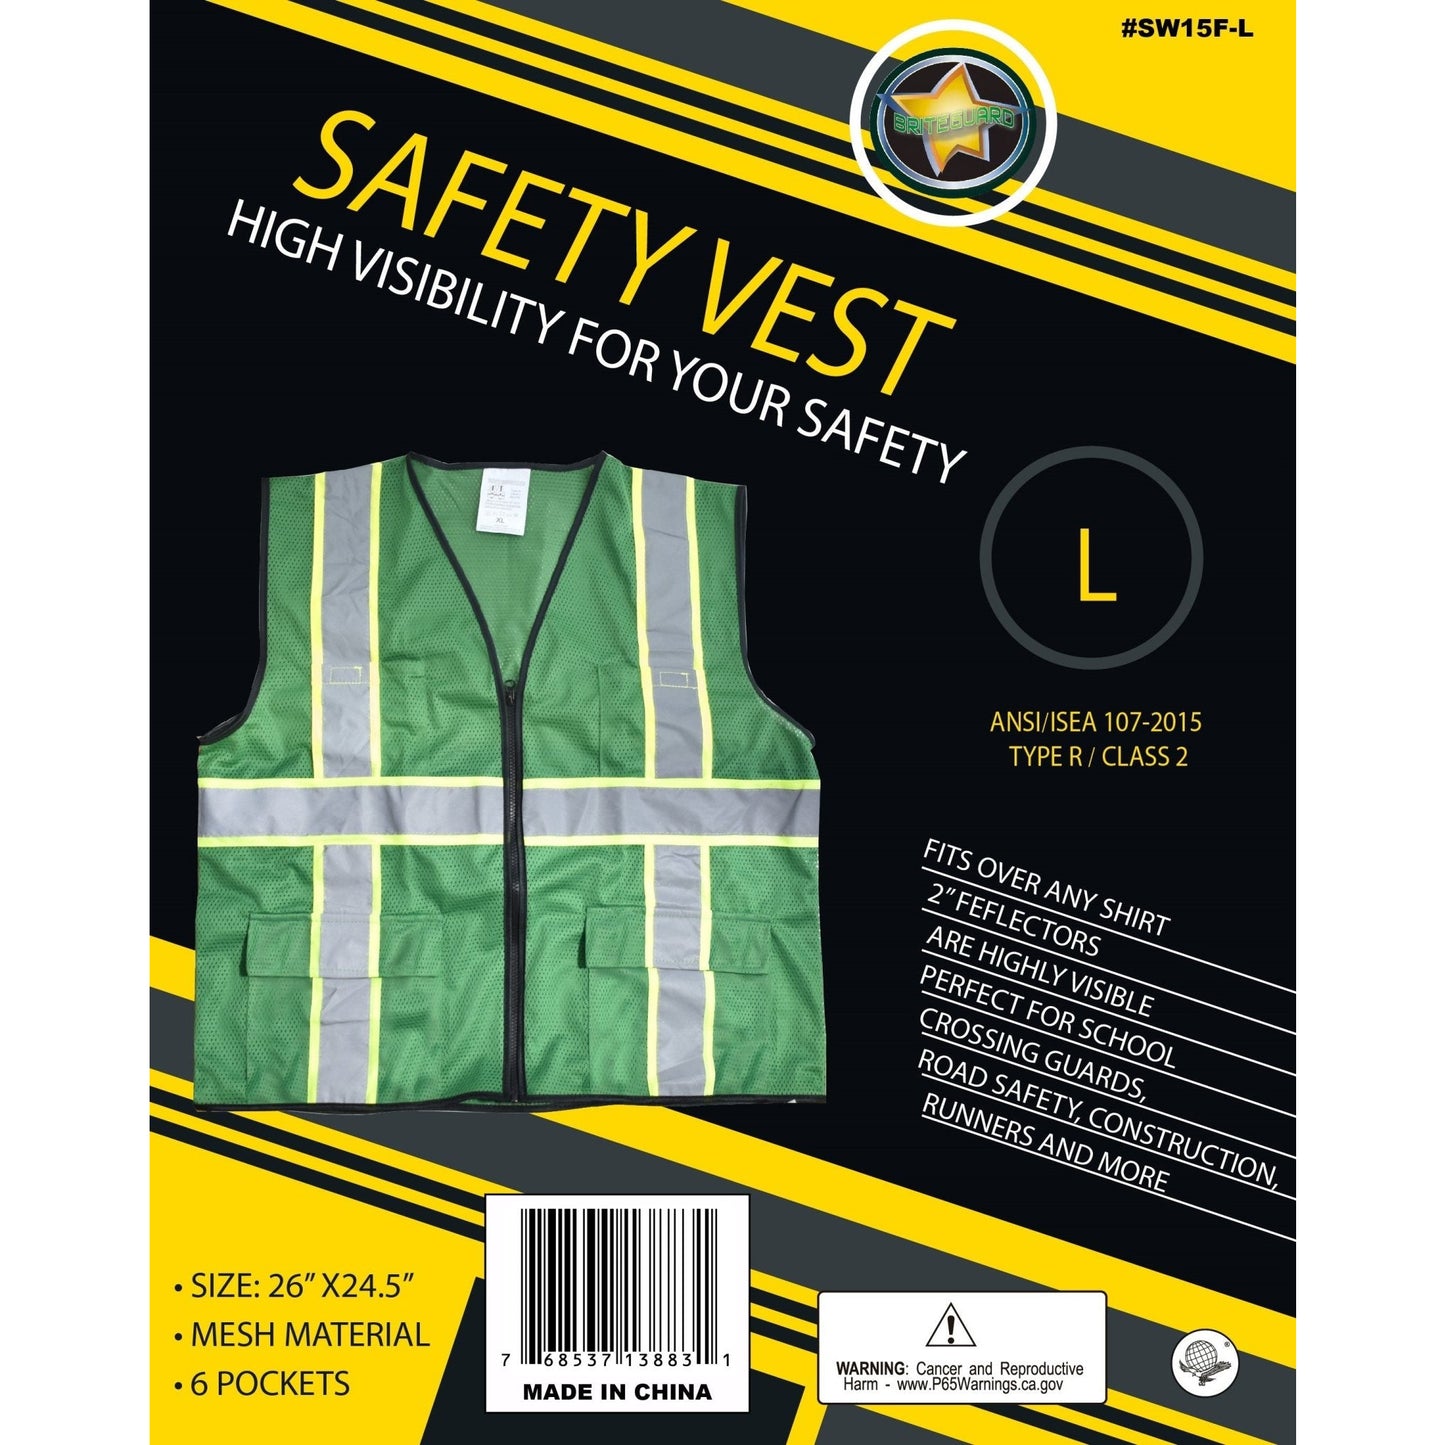 Forest Green Safety Vest With Neon Yellow And Silver Reflective Stripes-Size Large - SF-13883 - ToolUSA